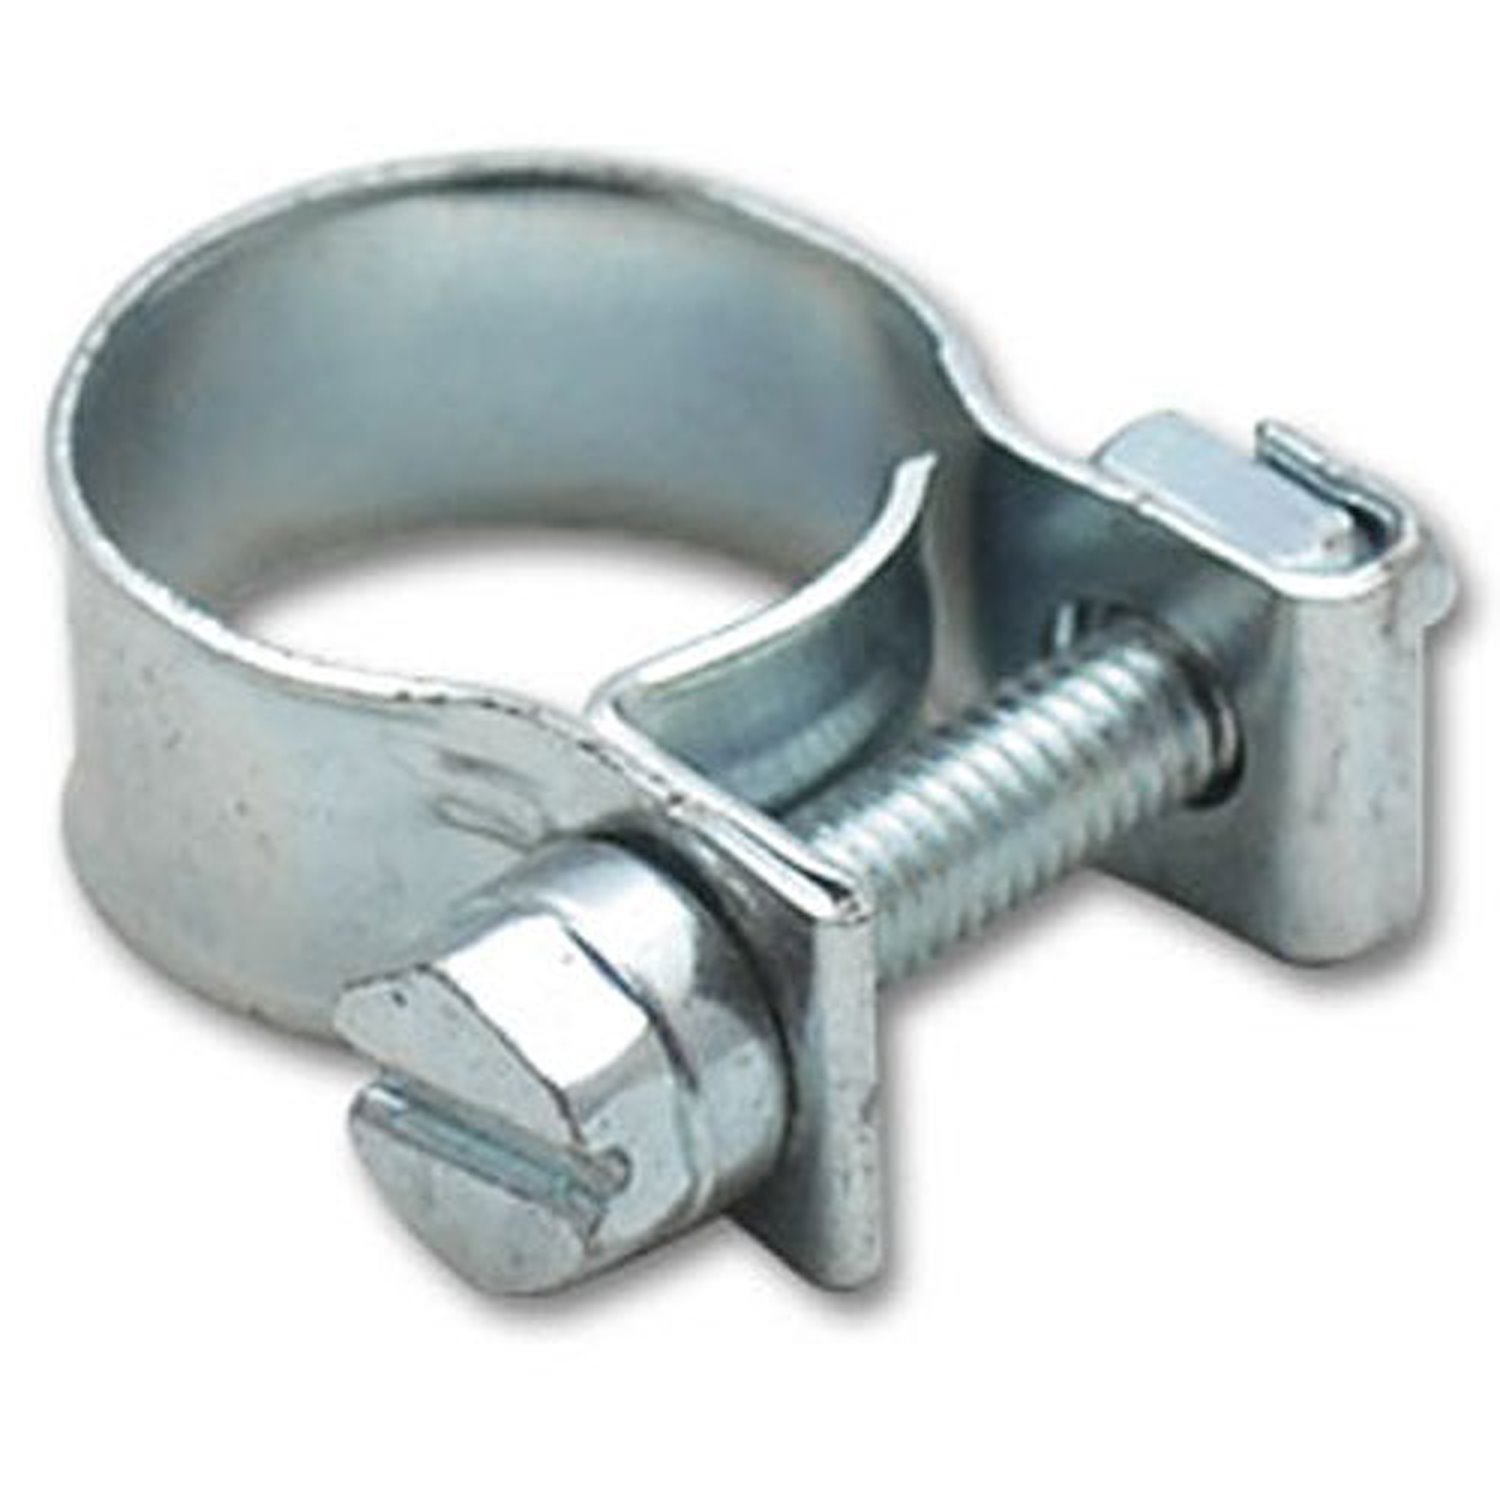 Fuel Injector Style Mini Hose Clamps 16mm - 18mm